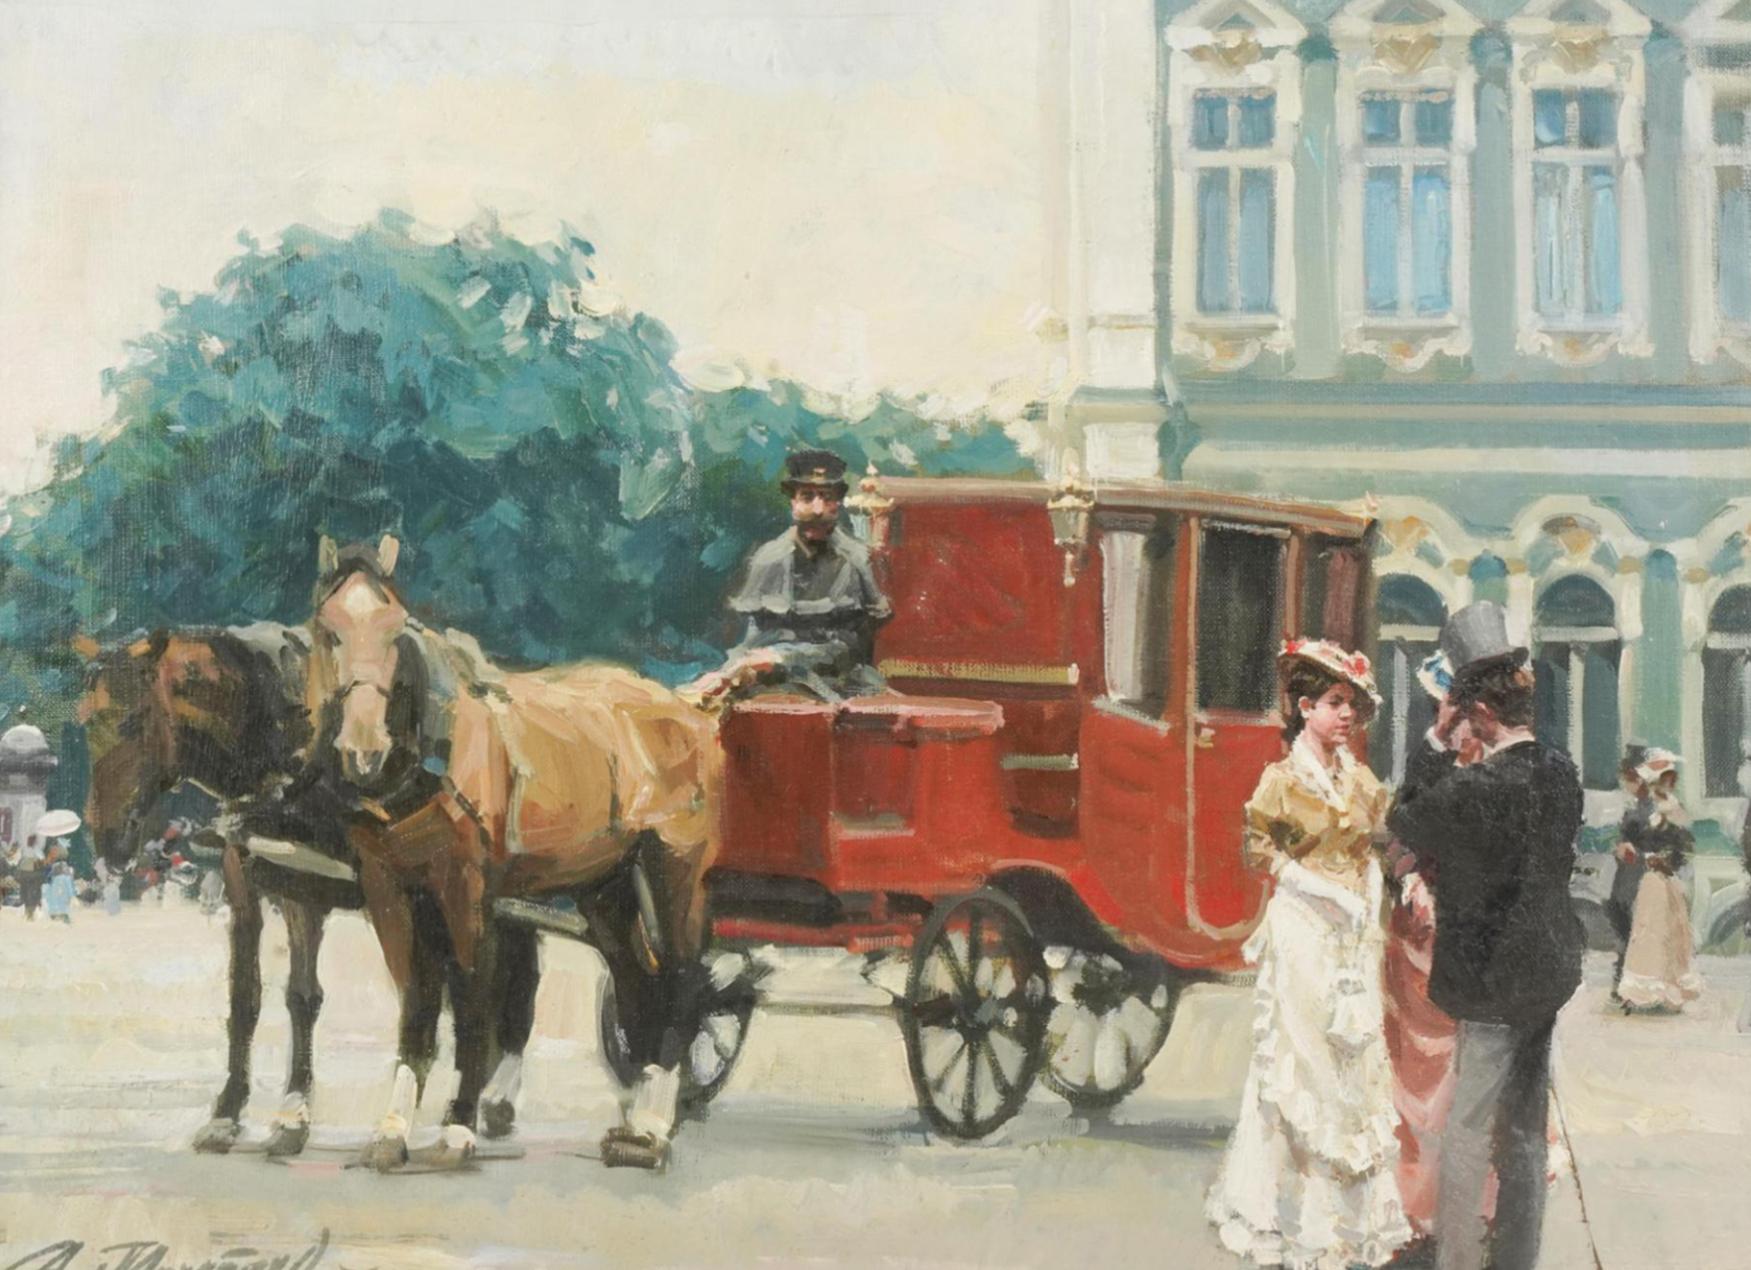 Paris Street Scene Oil Painting of Horse and Carriage. Artist signed I distinctly lower left.